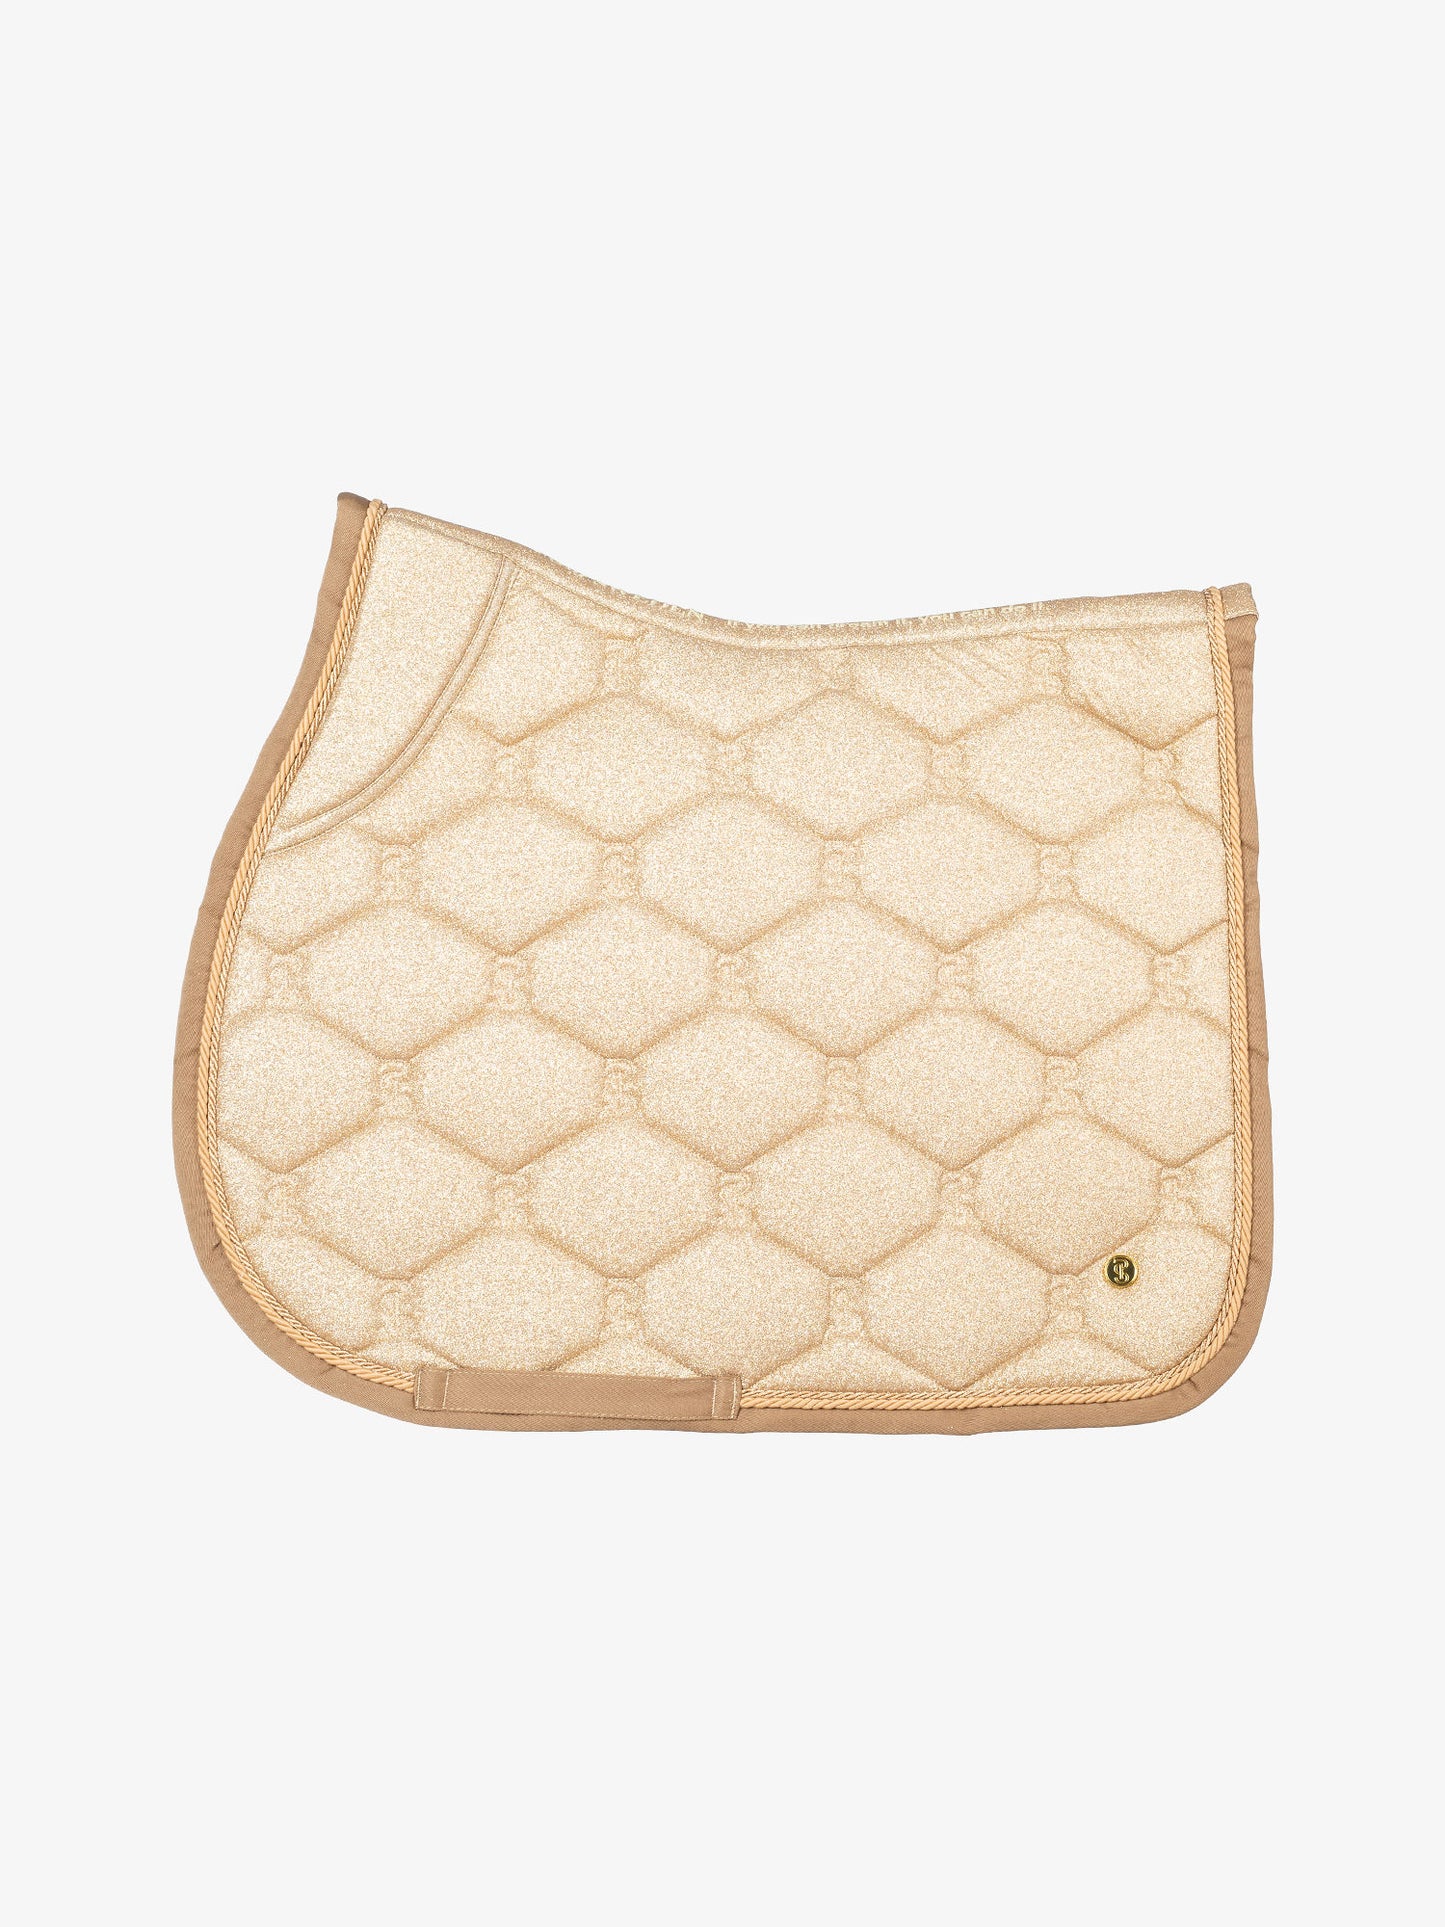 PS of Sweden Gold Stardust Jump Saddle Cloth